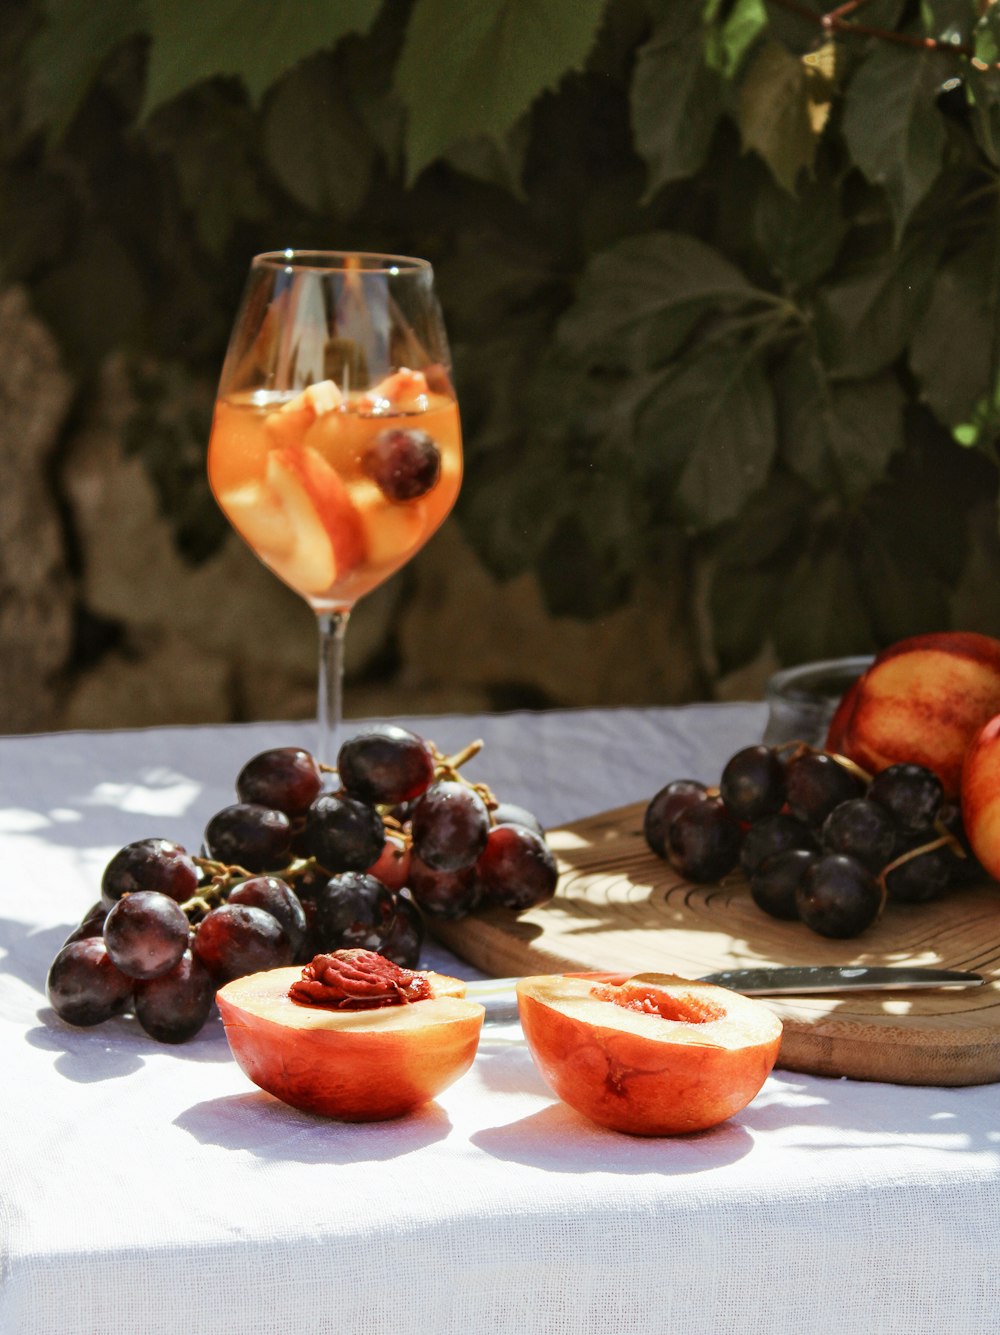 grapes and orange fruit on table